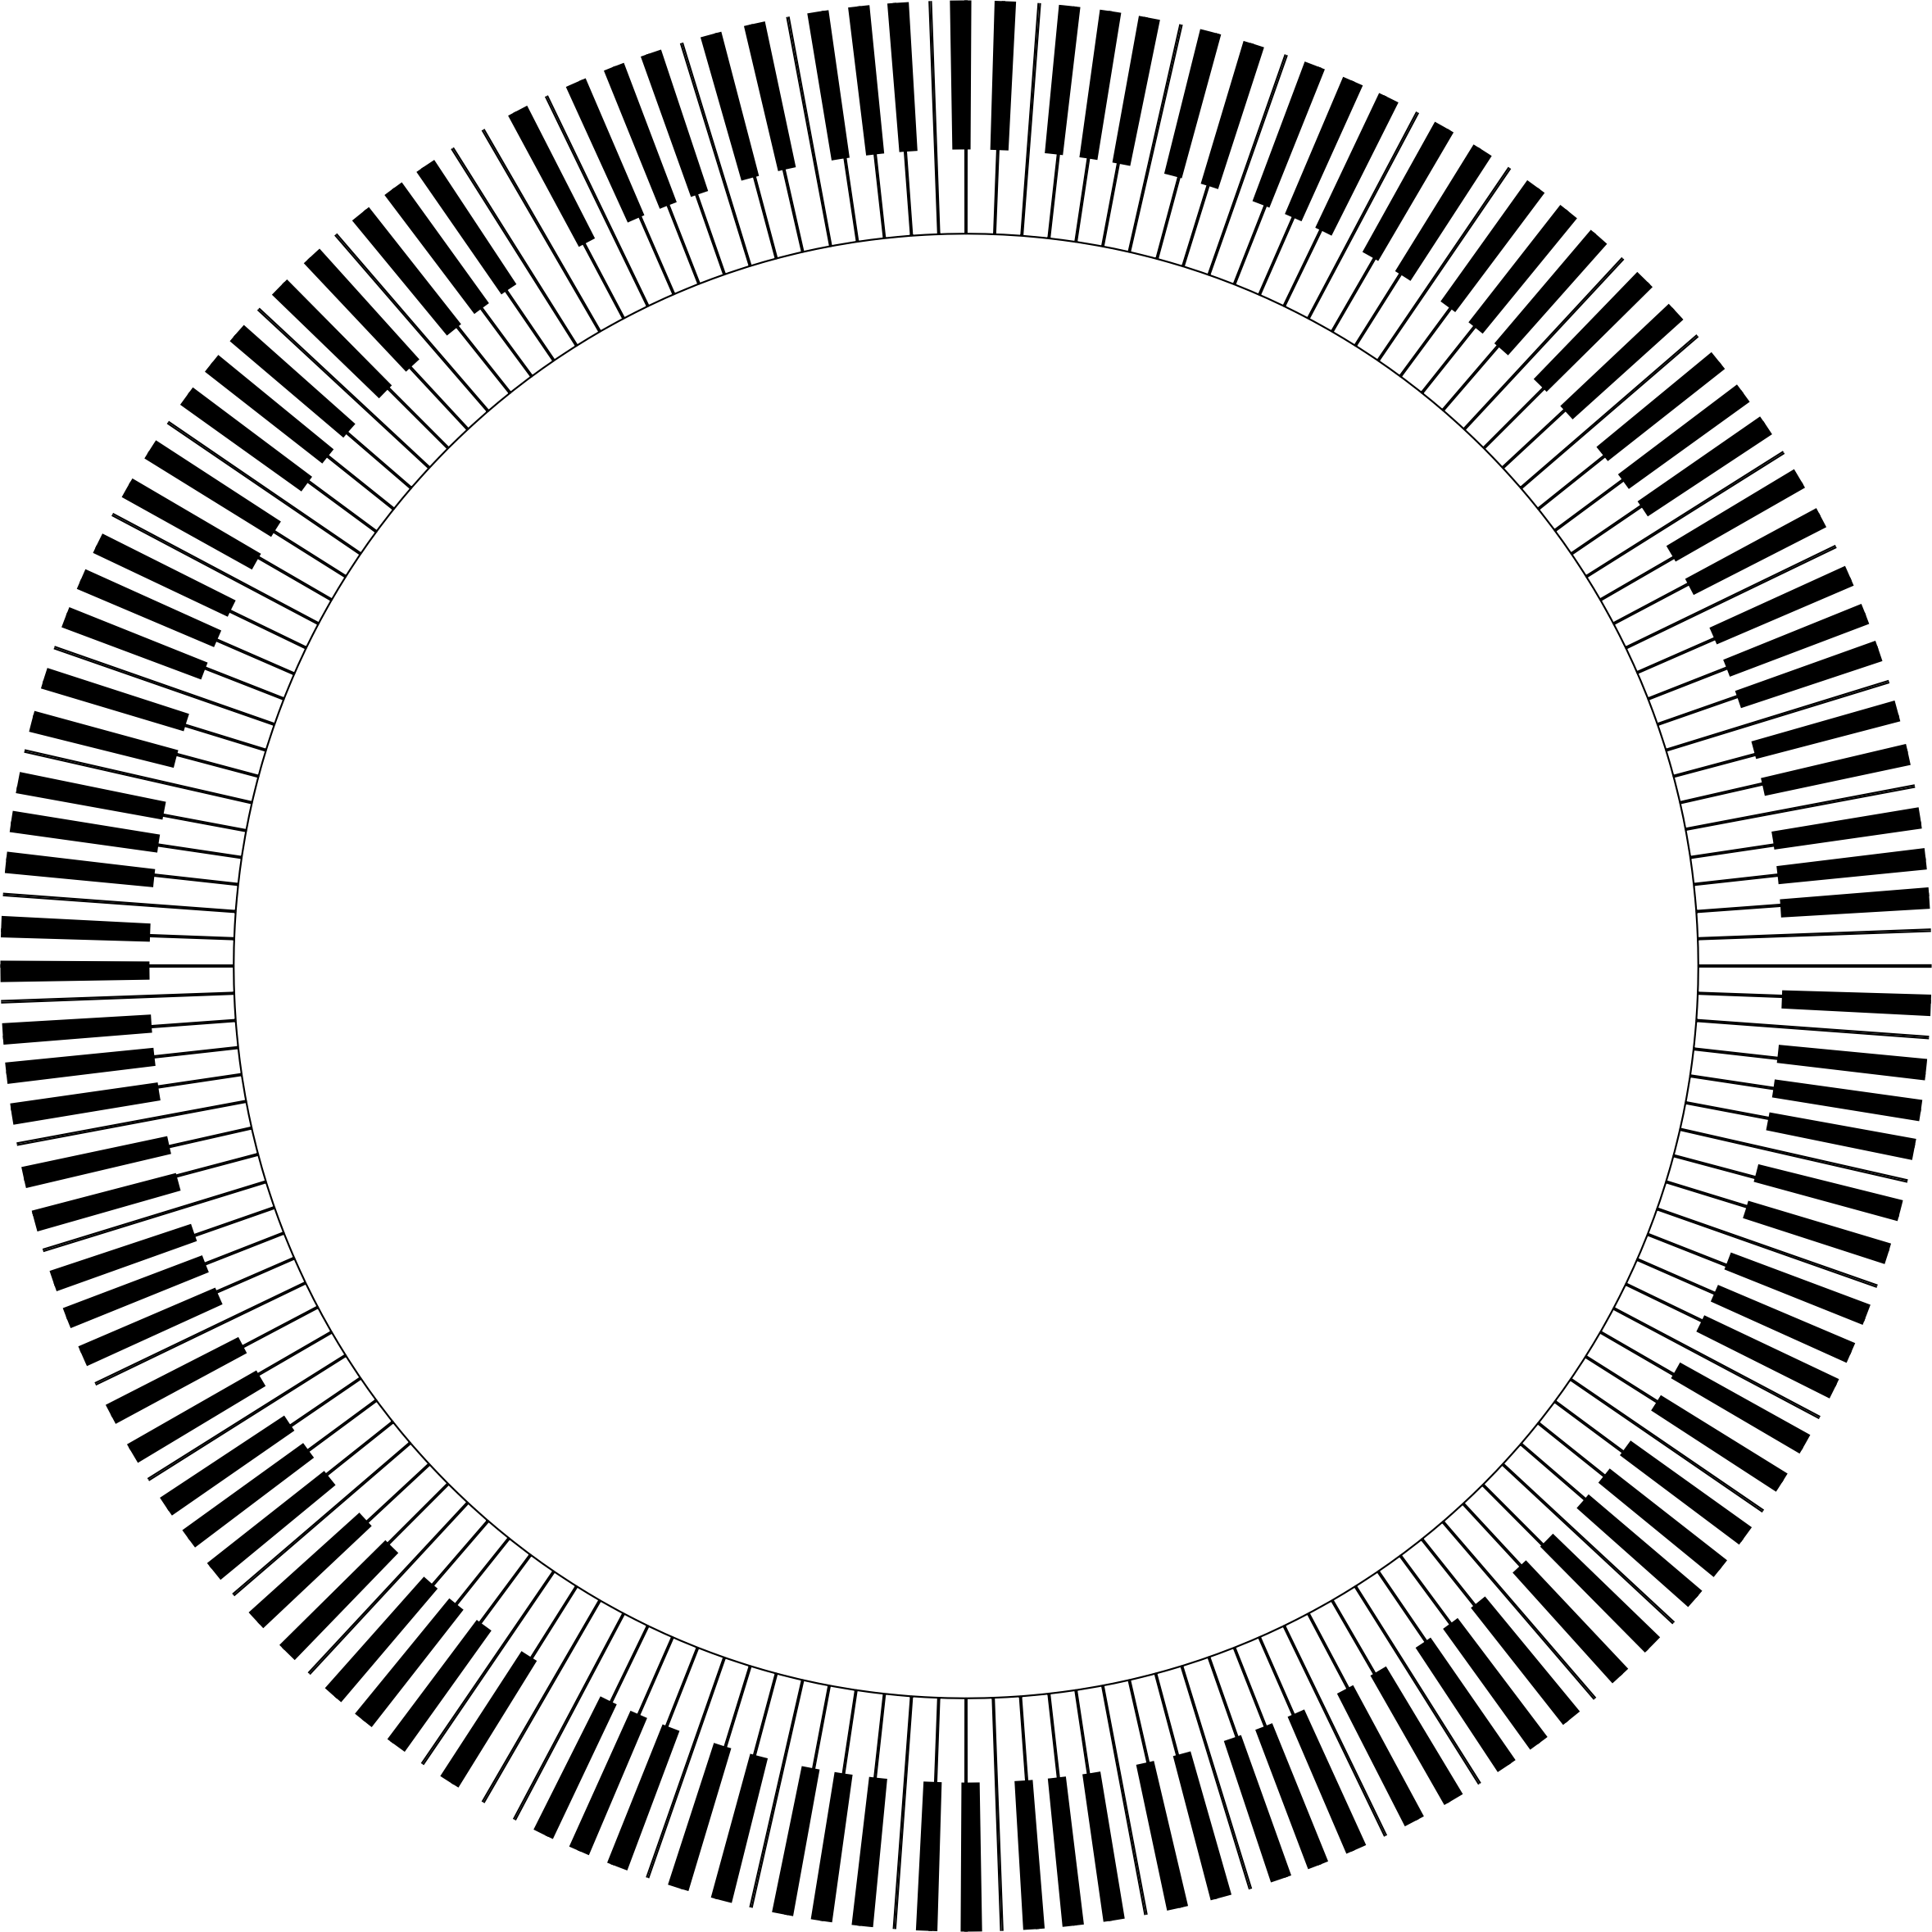 This Free Icons Png Design Of Piano Keys Circle Large - Illustration (2358x2358)